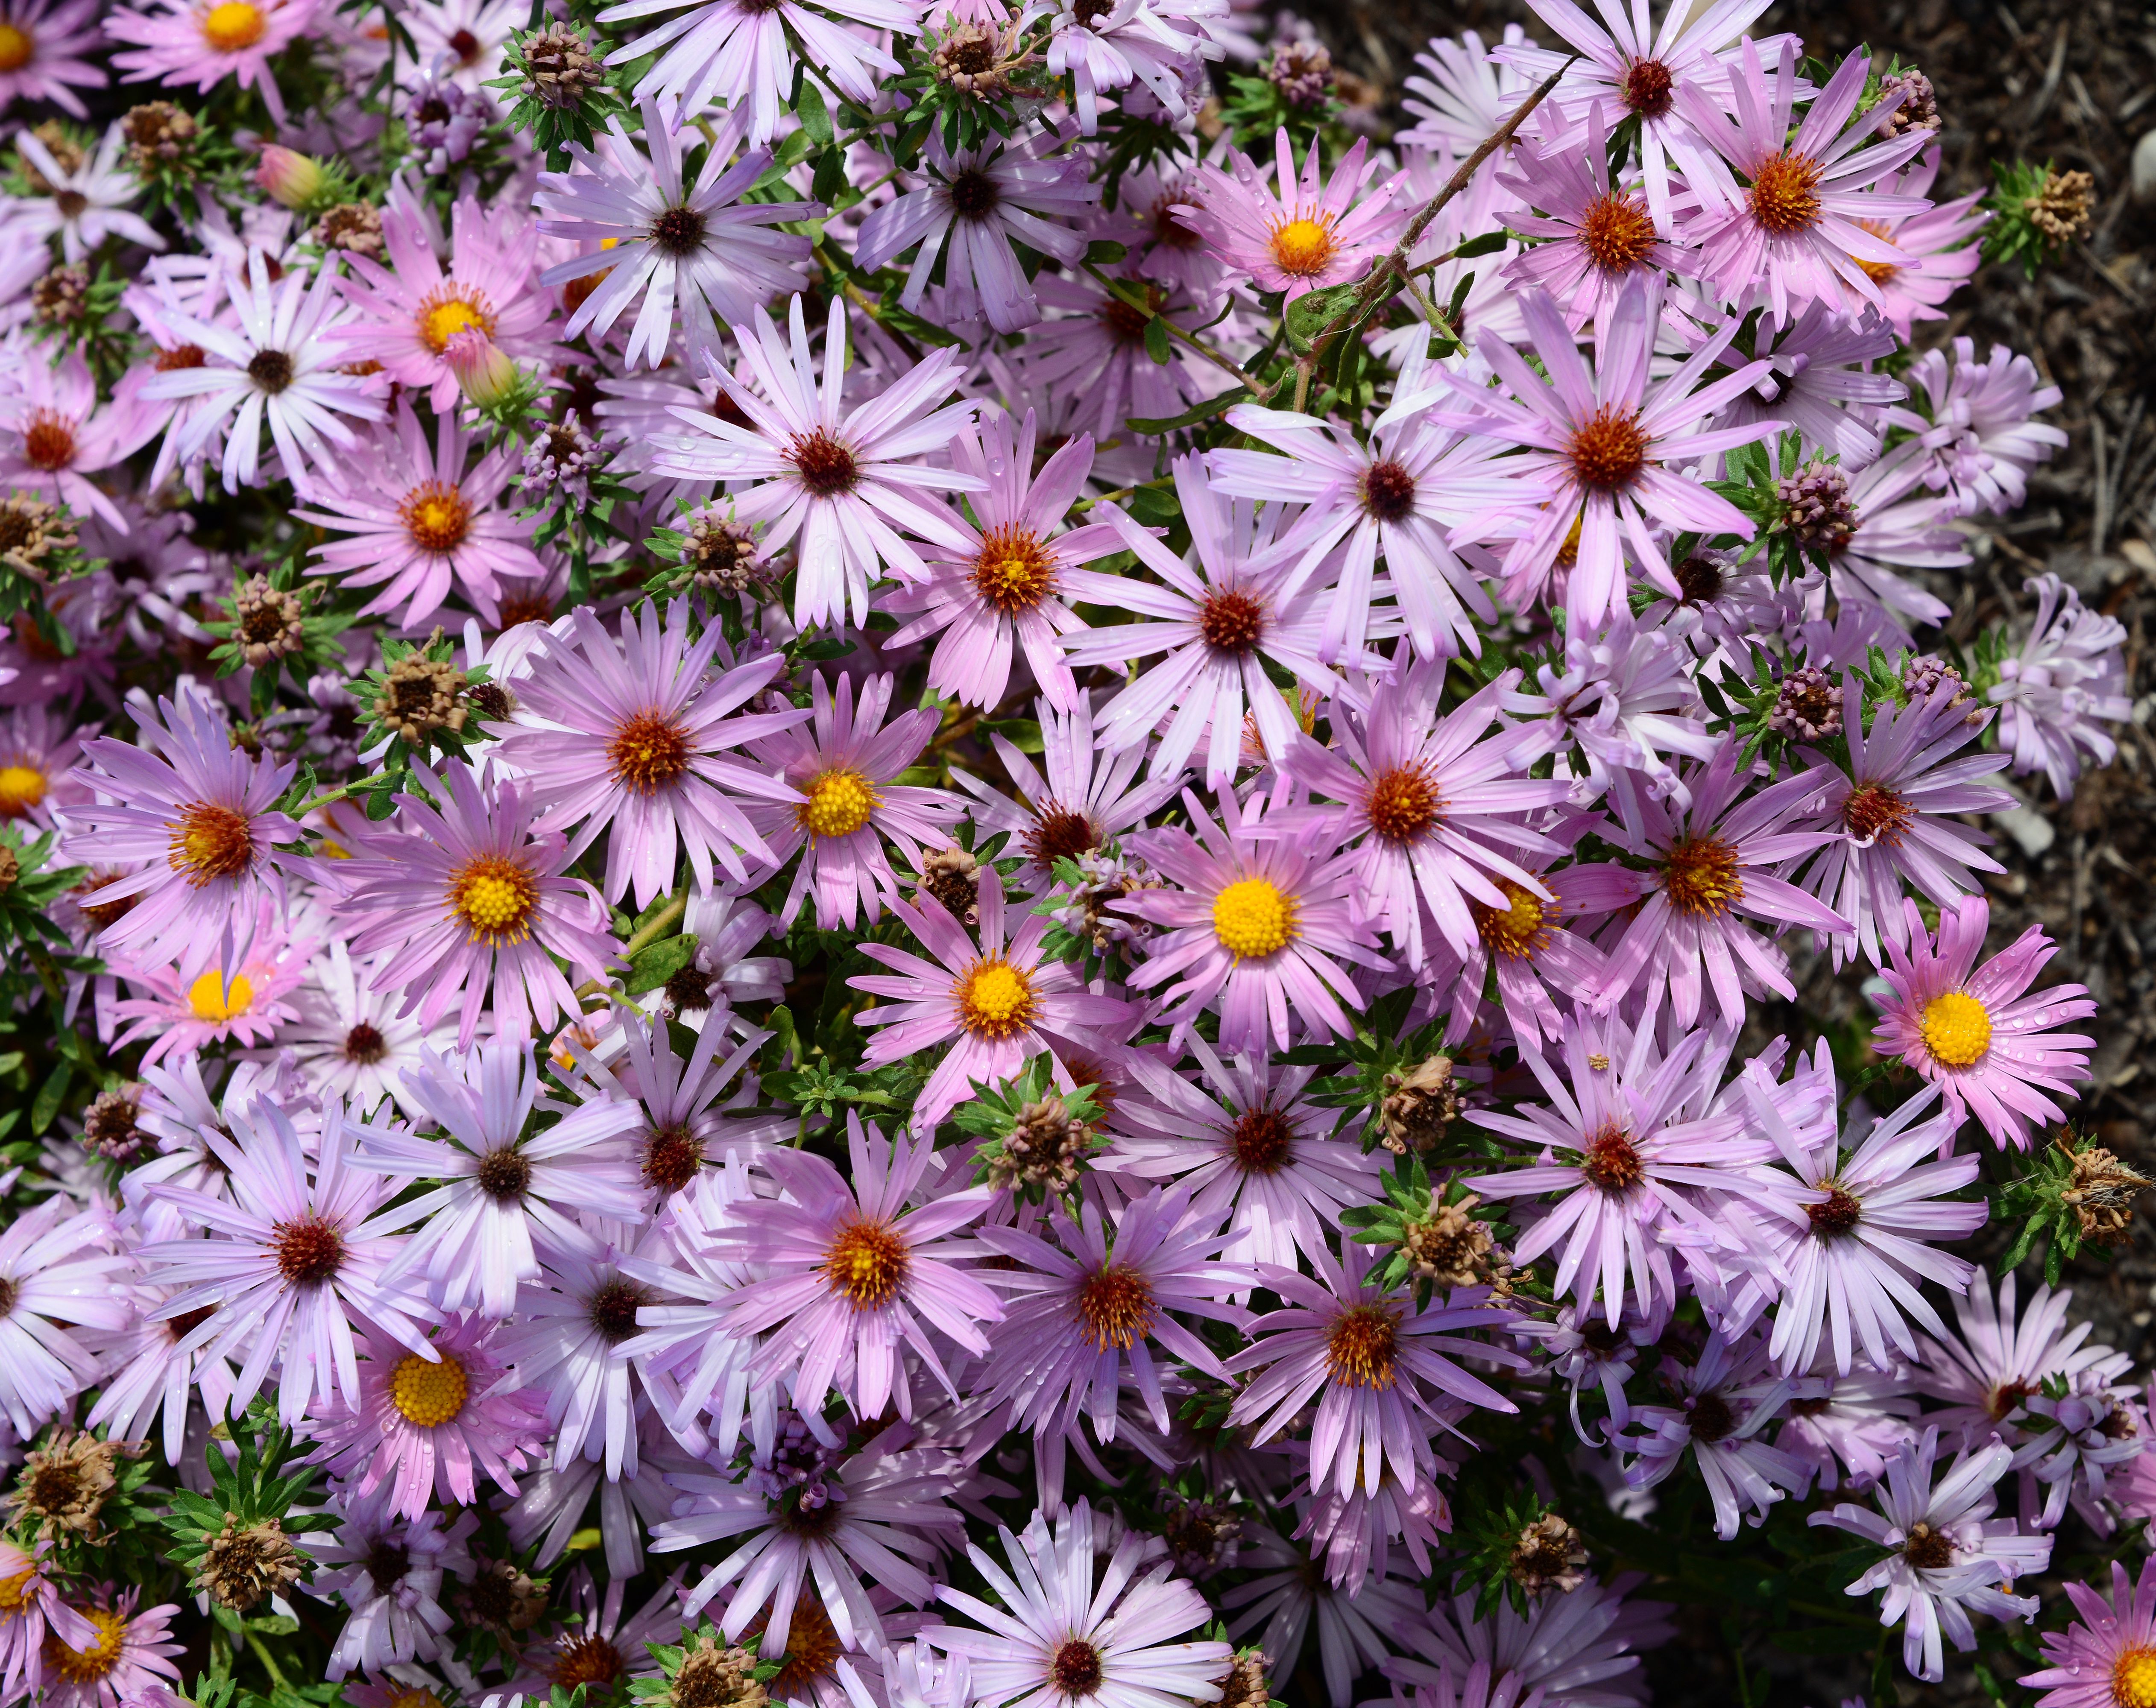 images/plants/aster/ast-cotton-candy/ast-cotton-candy-0003.jpg